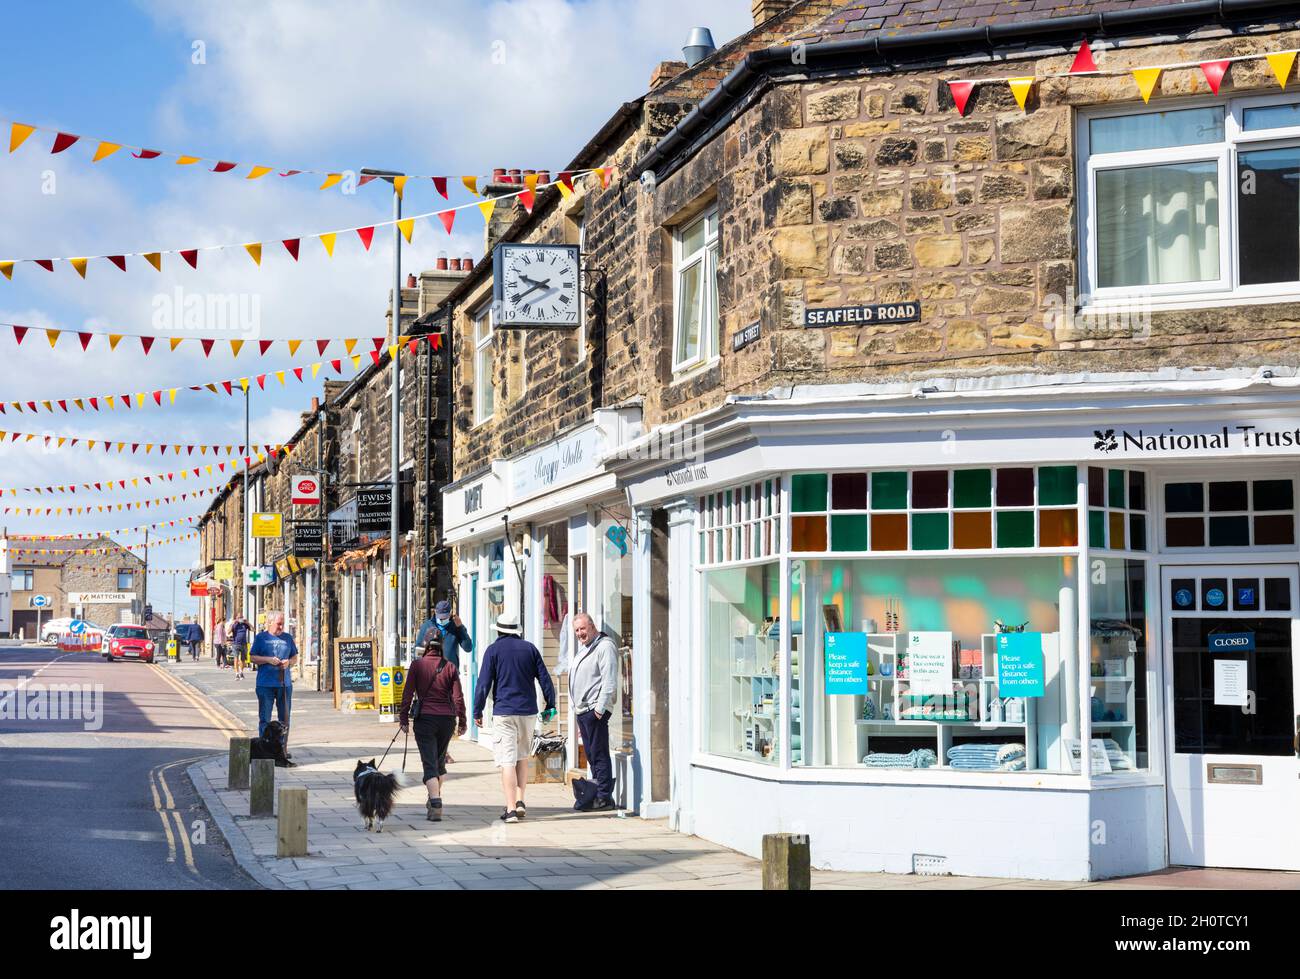 Shops on the Main street decked in bunting through Seahouses and the National Trust shop Seahouses Northumberland England UK GB Europe Stock Photo